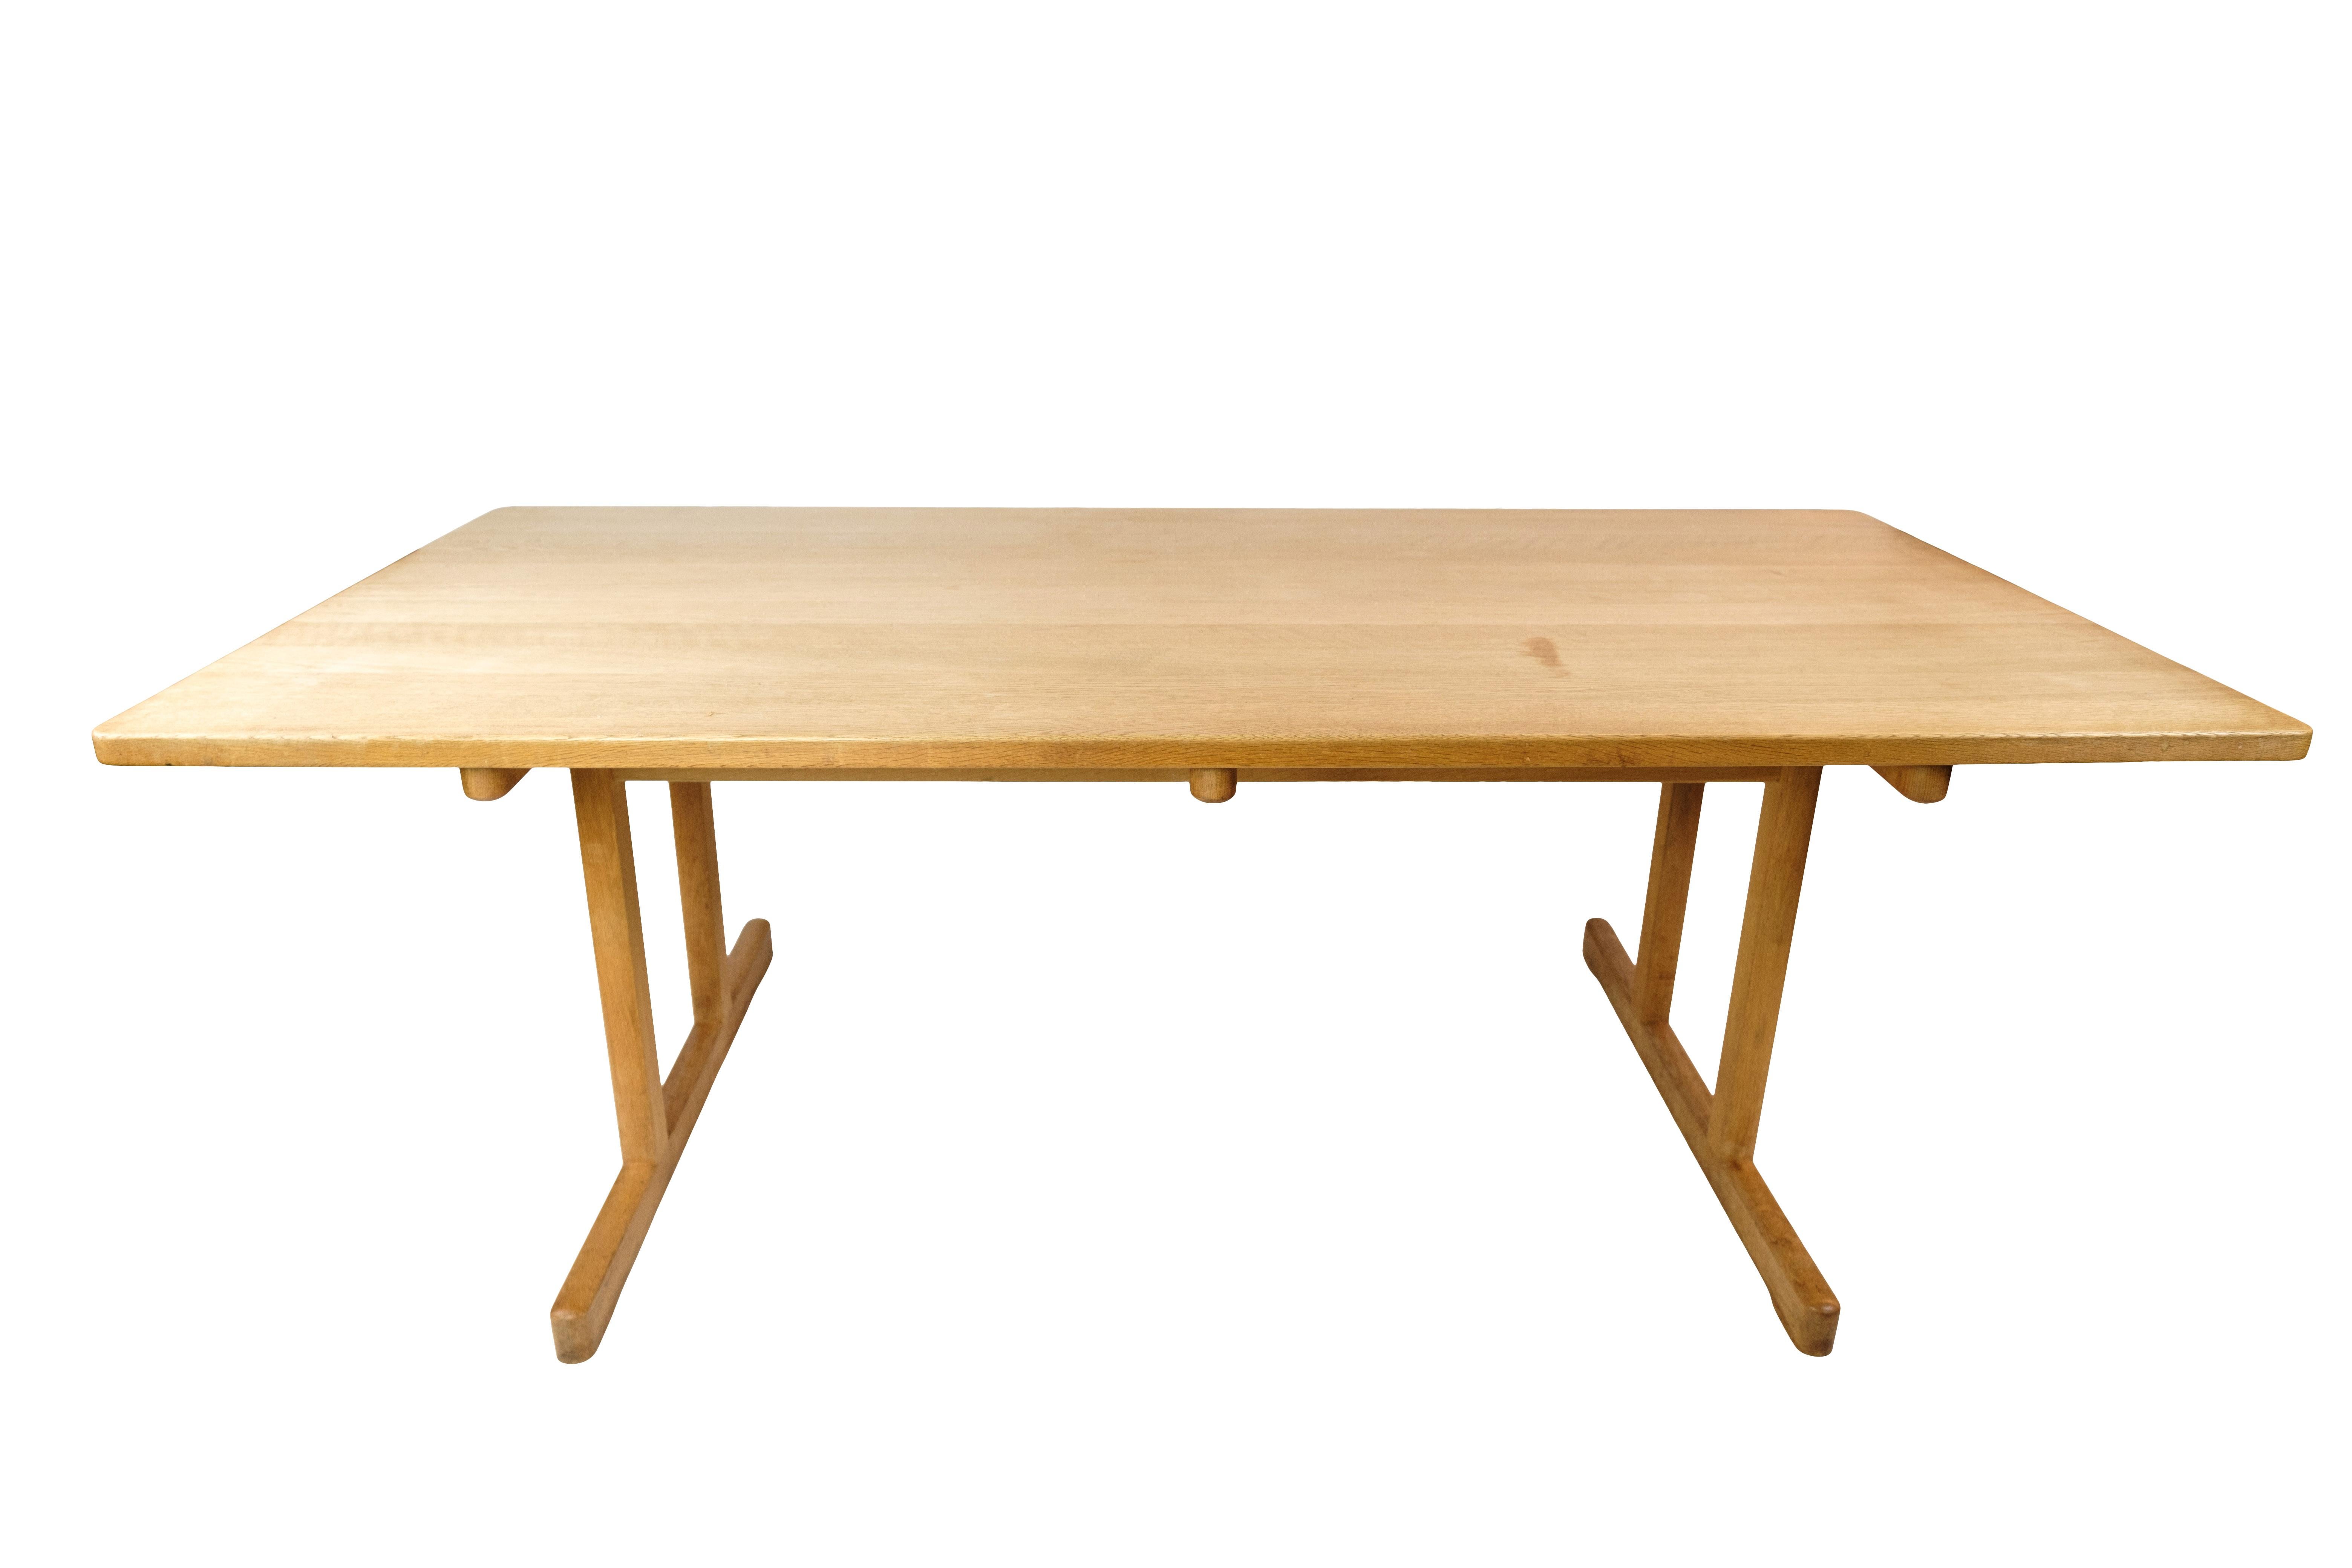 Shaker dining table, model C18, in solid soap-treated oak designed by Børge Mogensen in 1947 and manufactured in the 1960s. The table is in nice used condition.

This product will be inspected thoroughly at our professional workshop by our